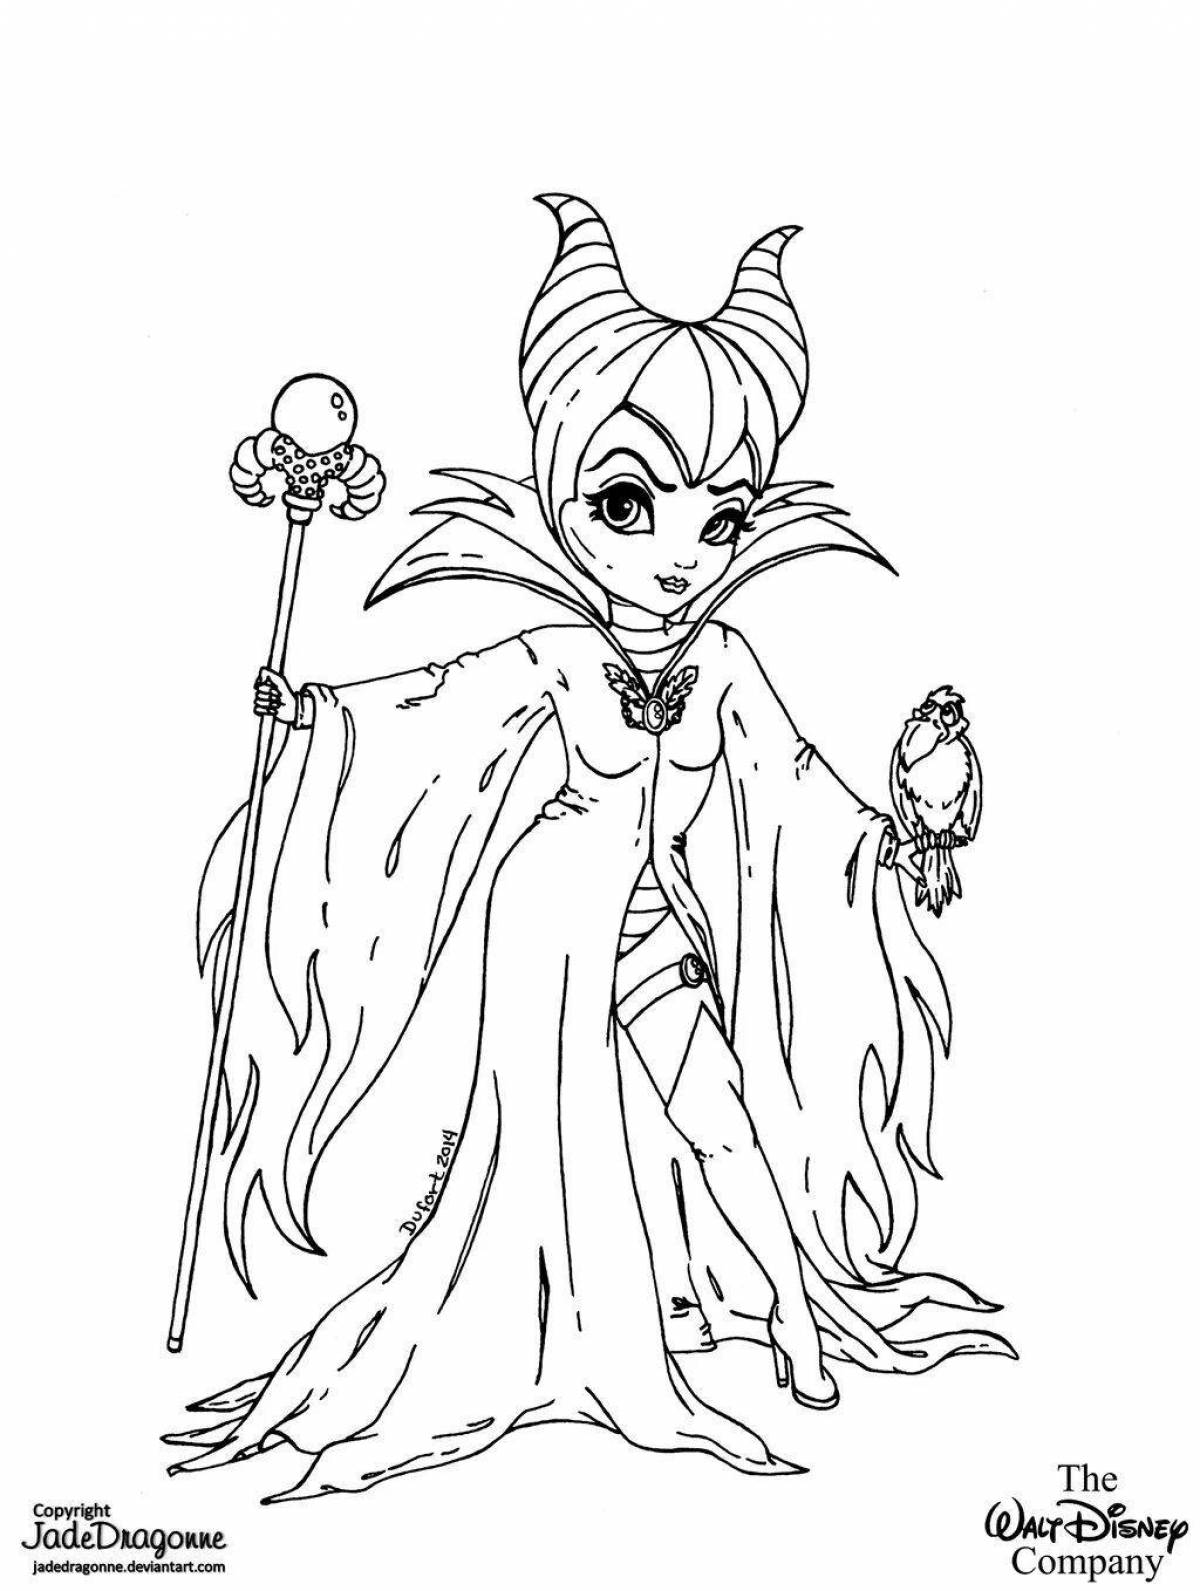 Maleficent coloring page for kids